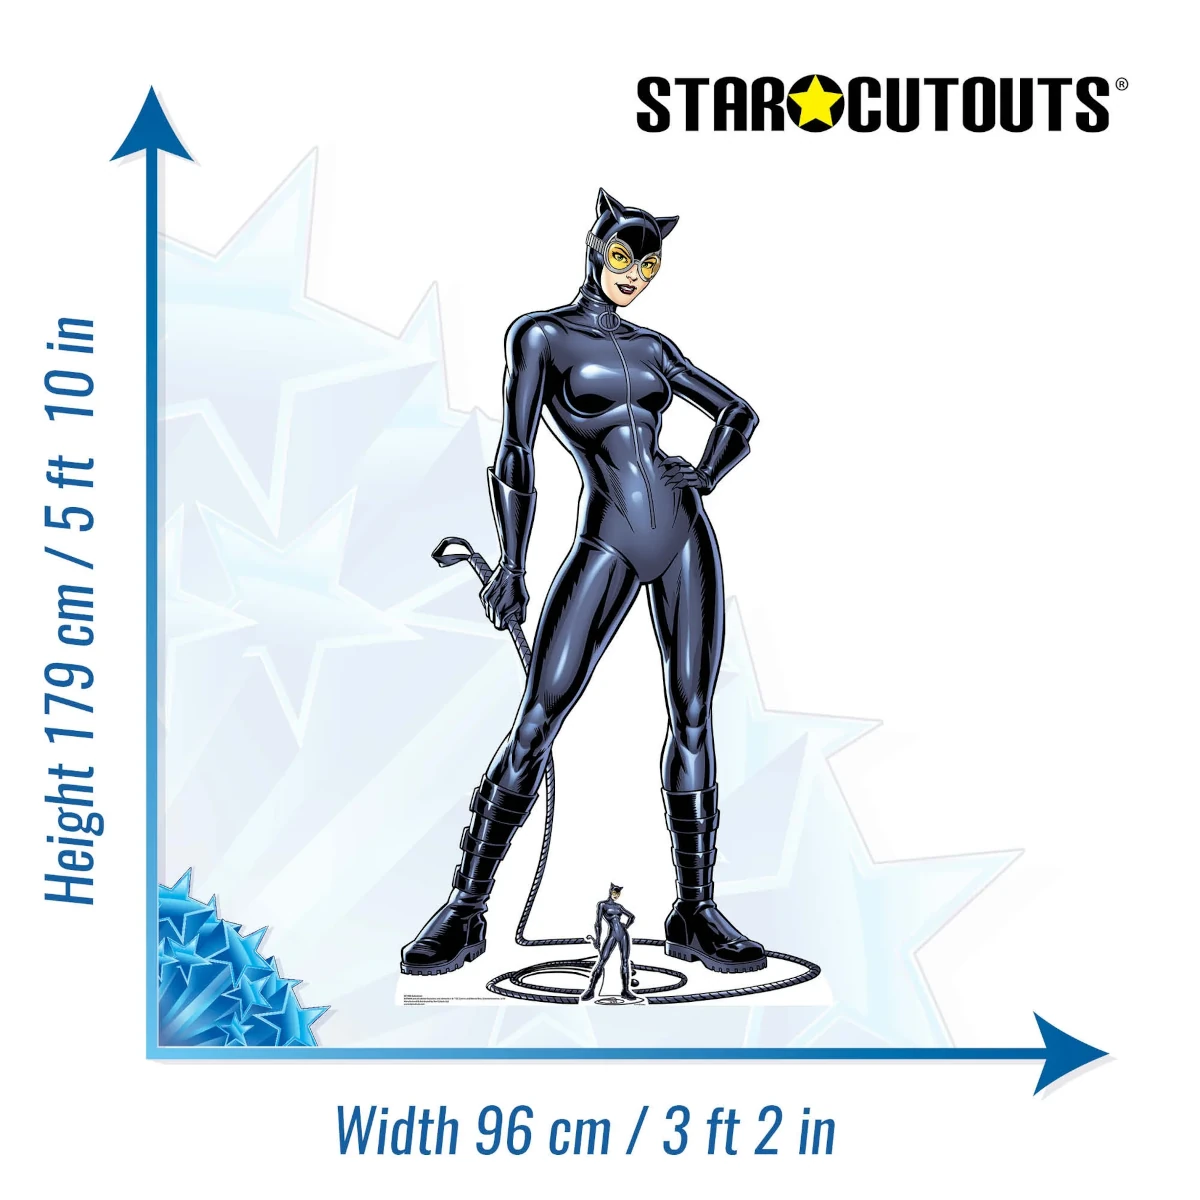 SC1456 Catwoman with Whip (DC Comics) Official Lifesize + Mini Cardboard Cutout Standee Size